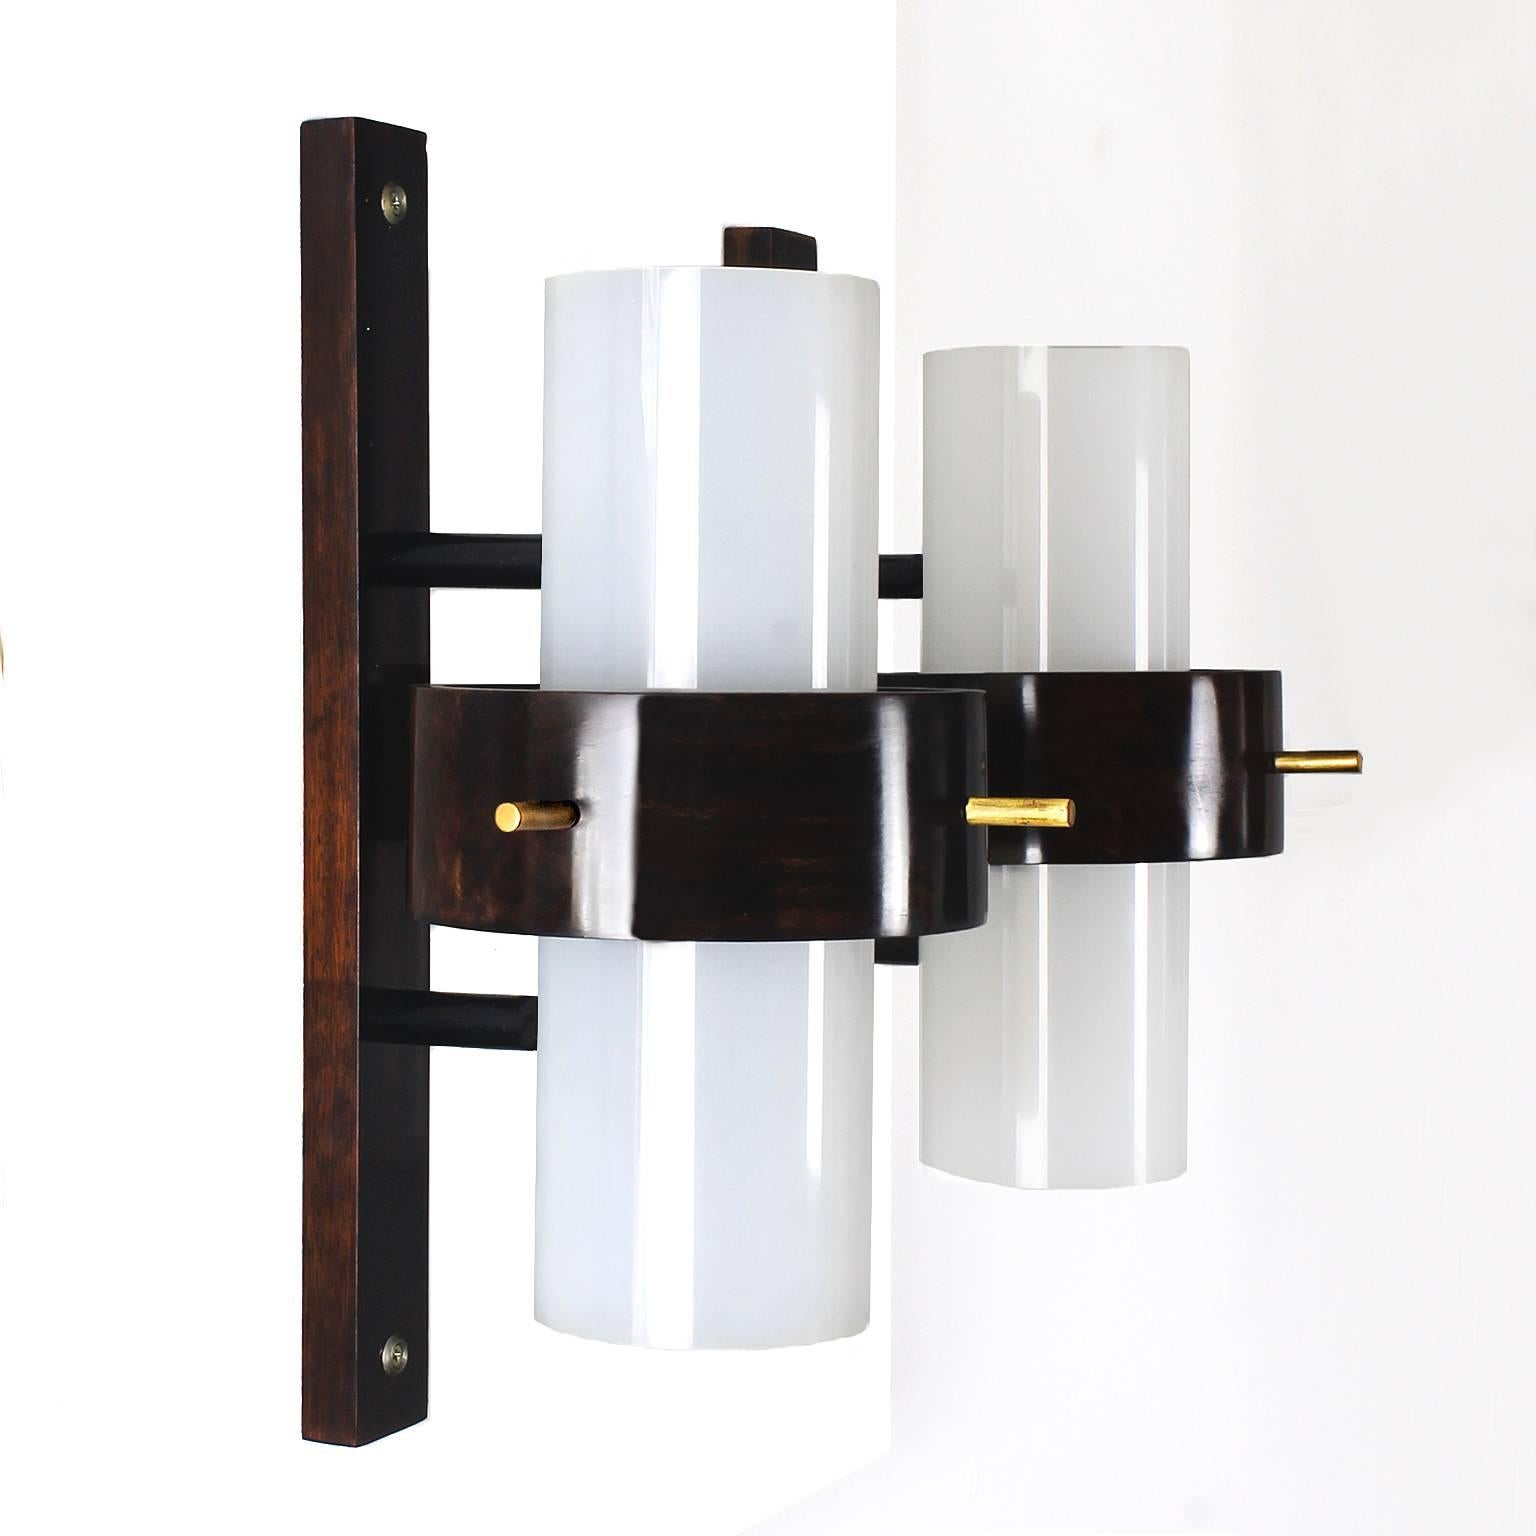 Rare set of four wall lights in exotic solid wood, french polish, plexiglass and polished brass,

France, circa 1960.